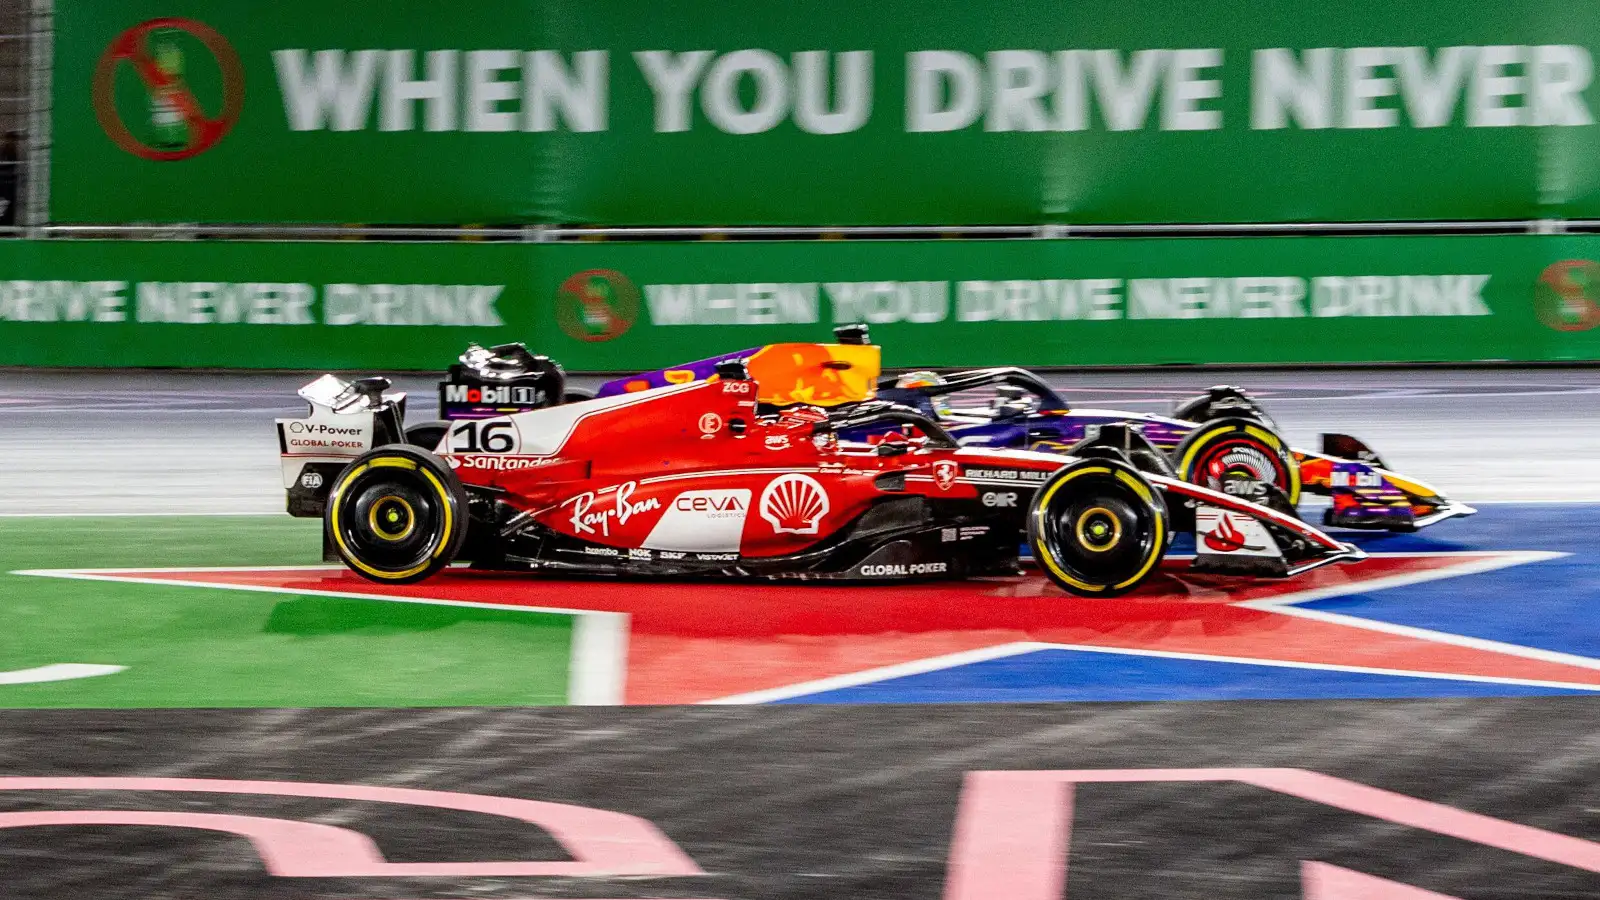 Eventual race winner Max Verstappen pushes Charles Leclerc wide as they fight for the lead.